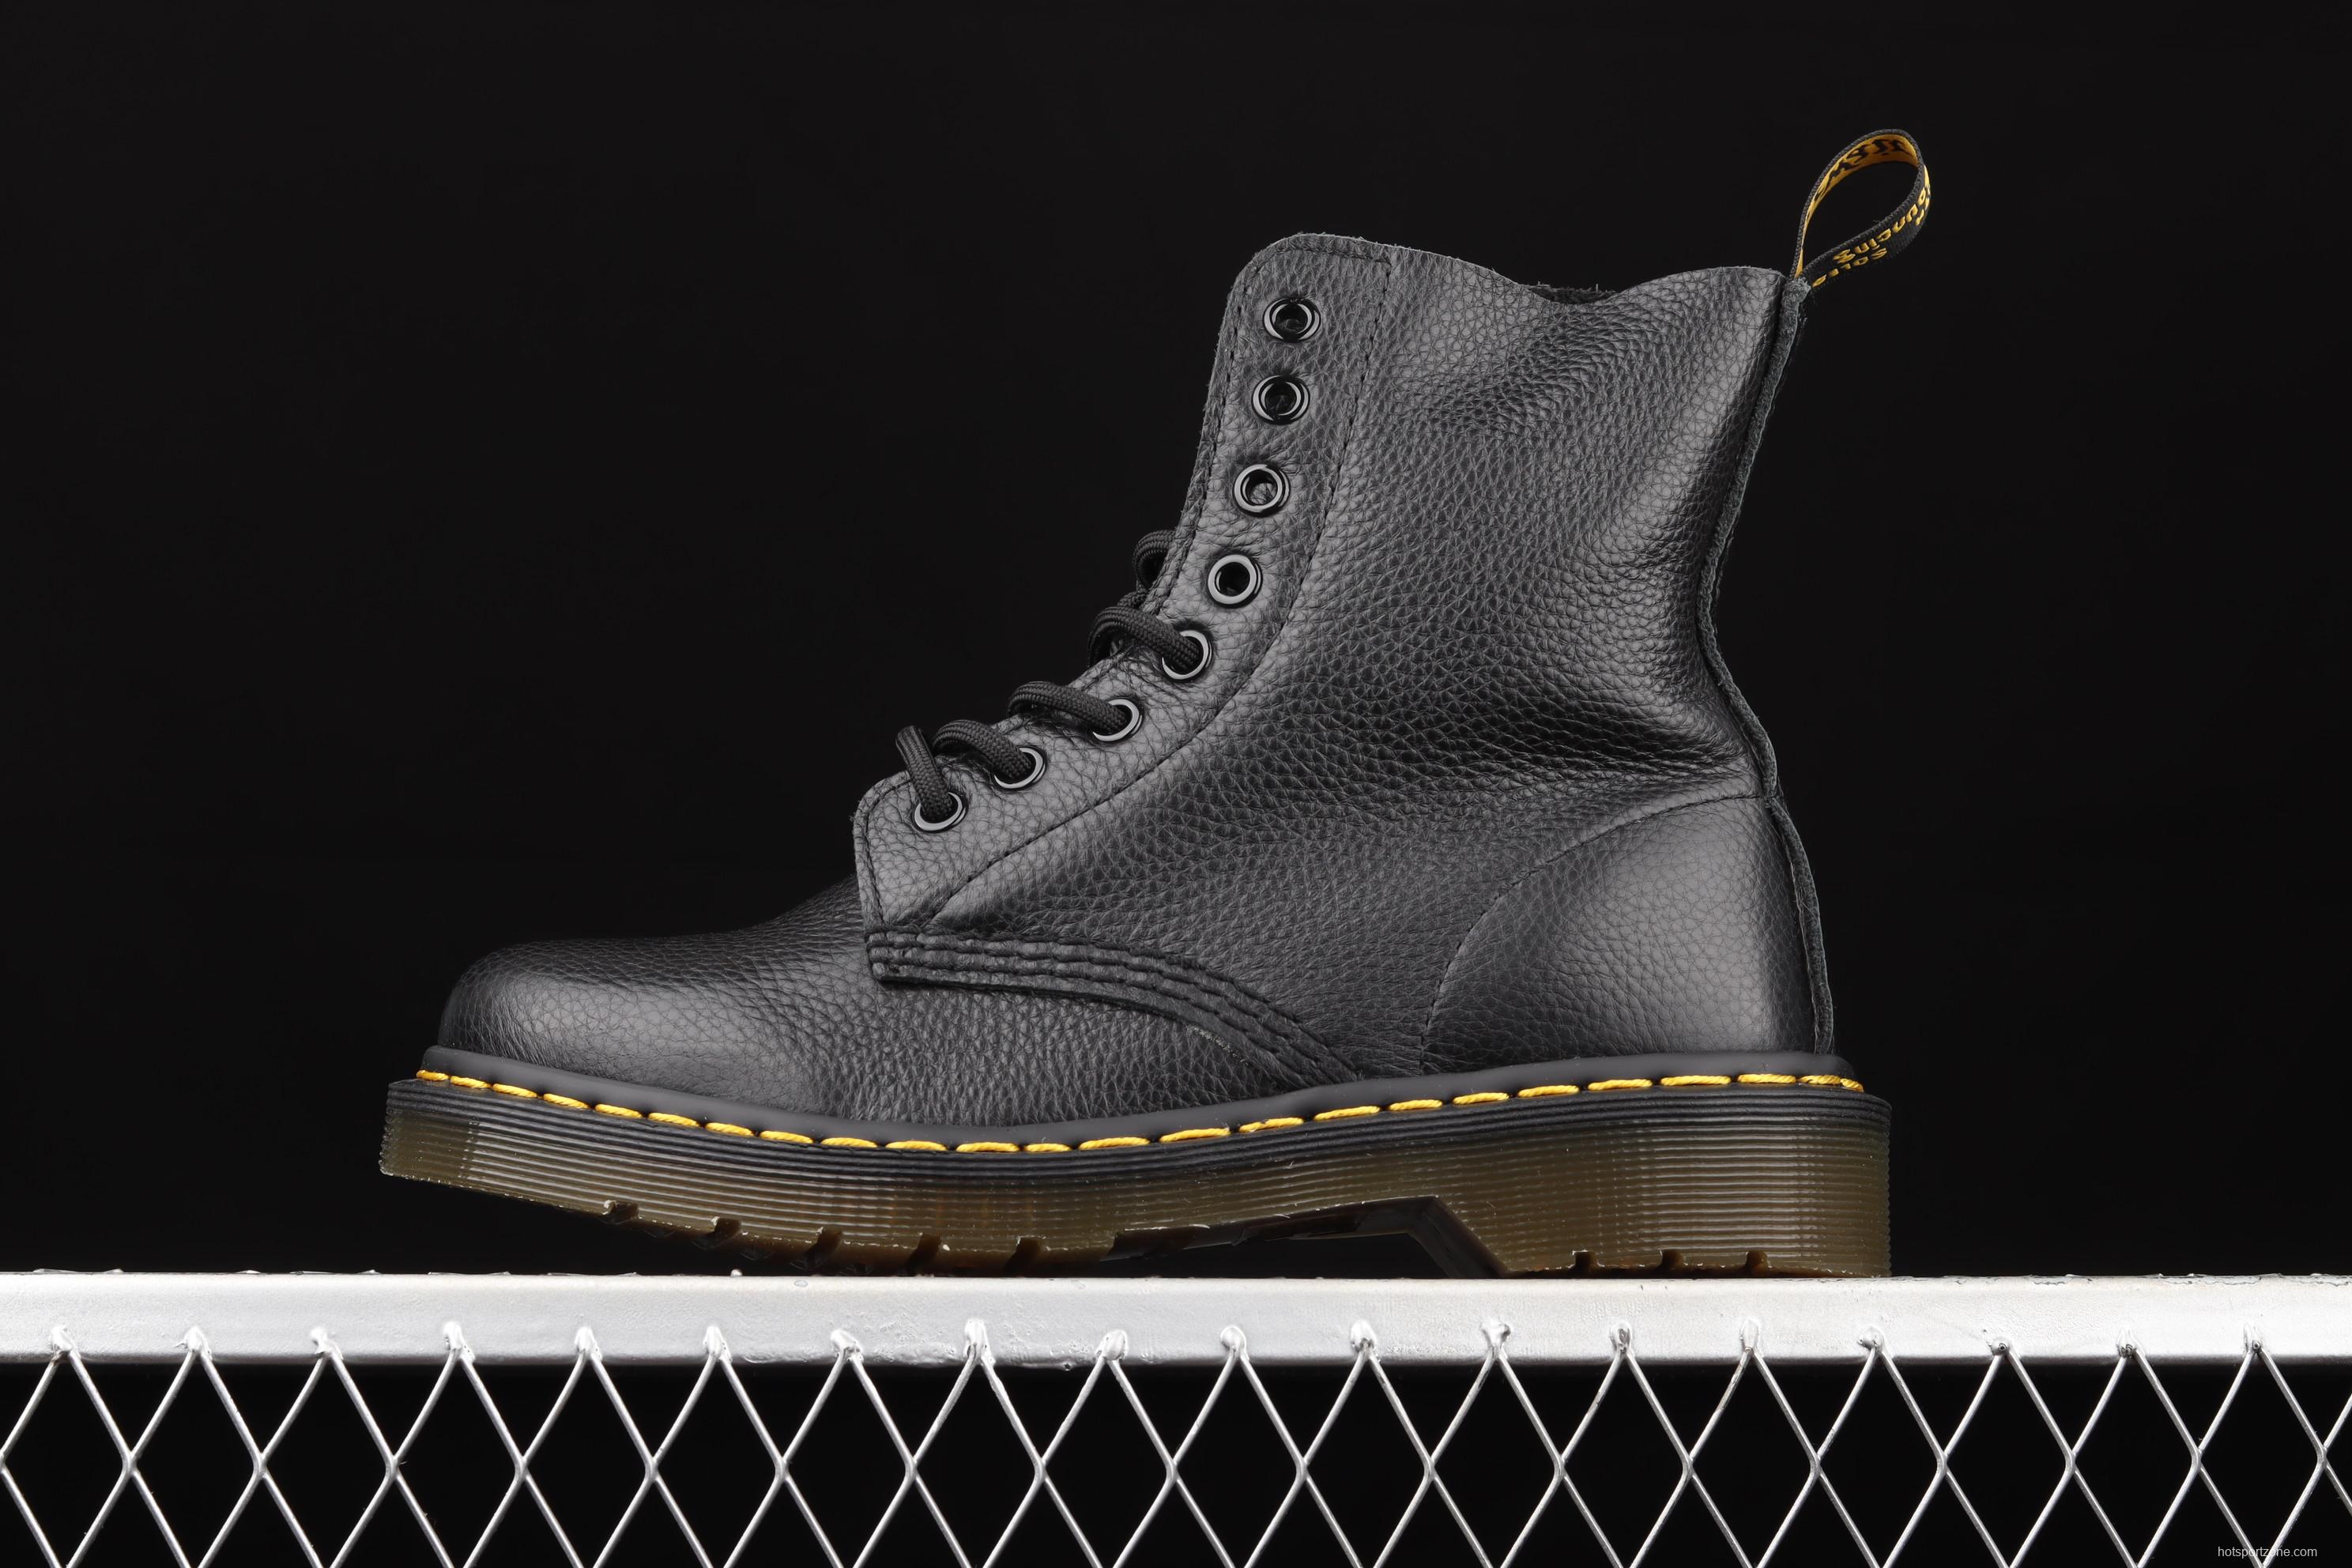 Dr.martens Martin boots 1460 series litchi soft leather eight holes Gaobang 13512006